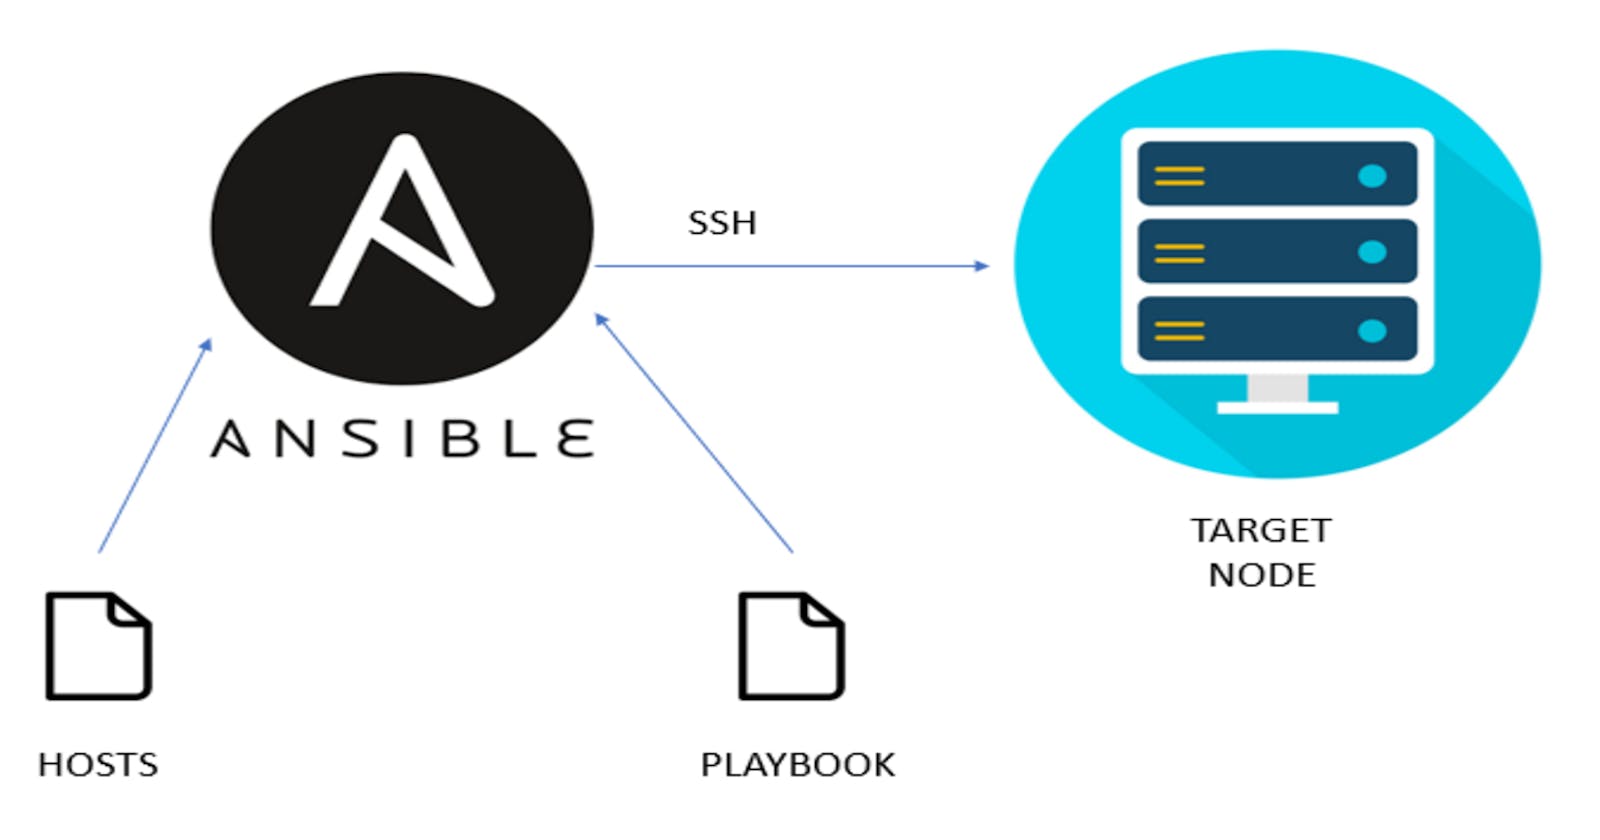 Ansible Playbook: Nginx Installation and Webpage Deployment